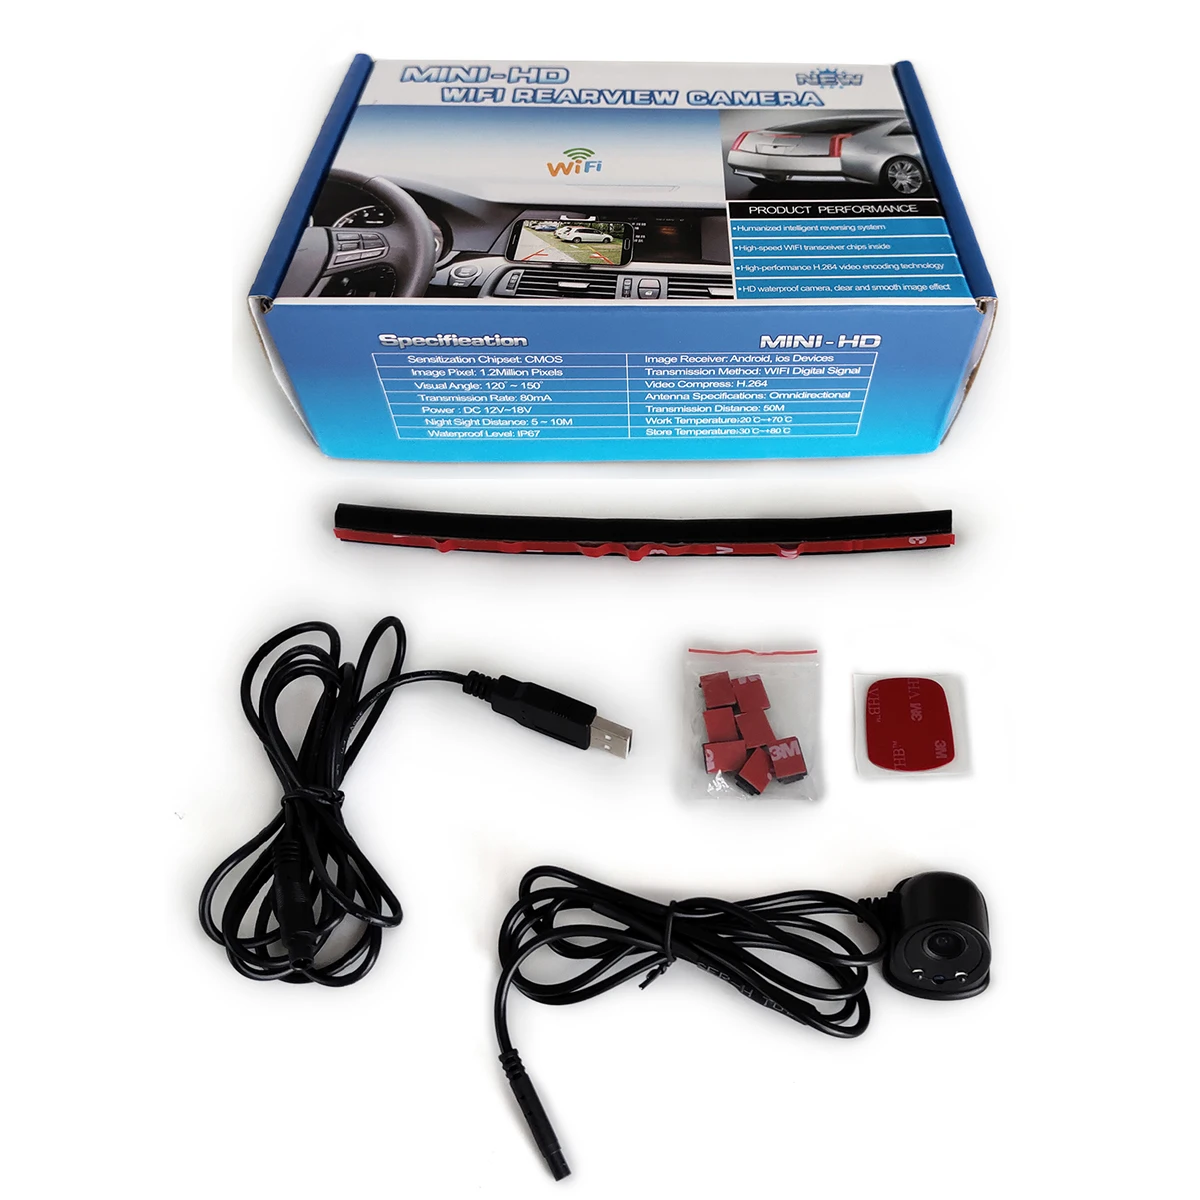 Auto Electronic Mini Wireless Camera Wifi Back Up Reserve Waterproof Car Camera Side For Cars - Buy Mini Wifi,Auto Electronic,Car Camera on Alibaba.com